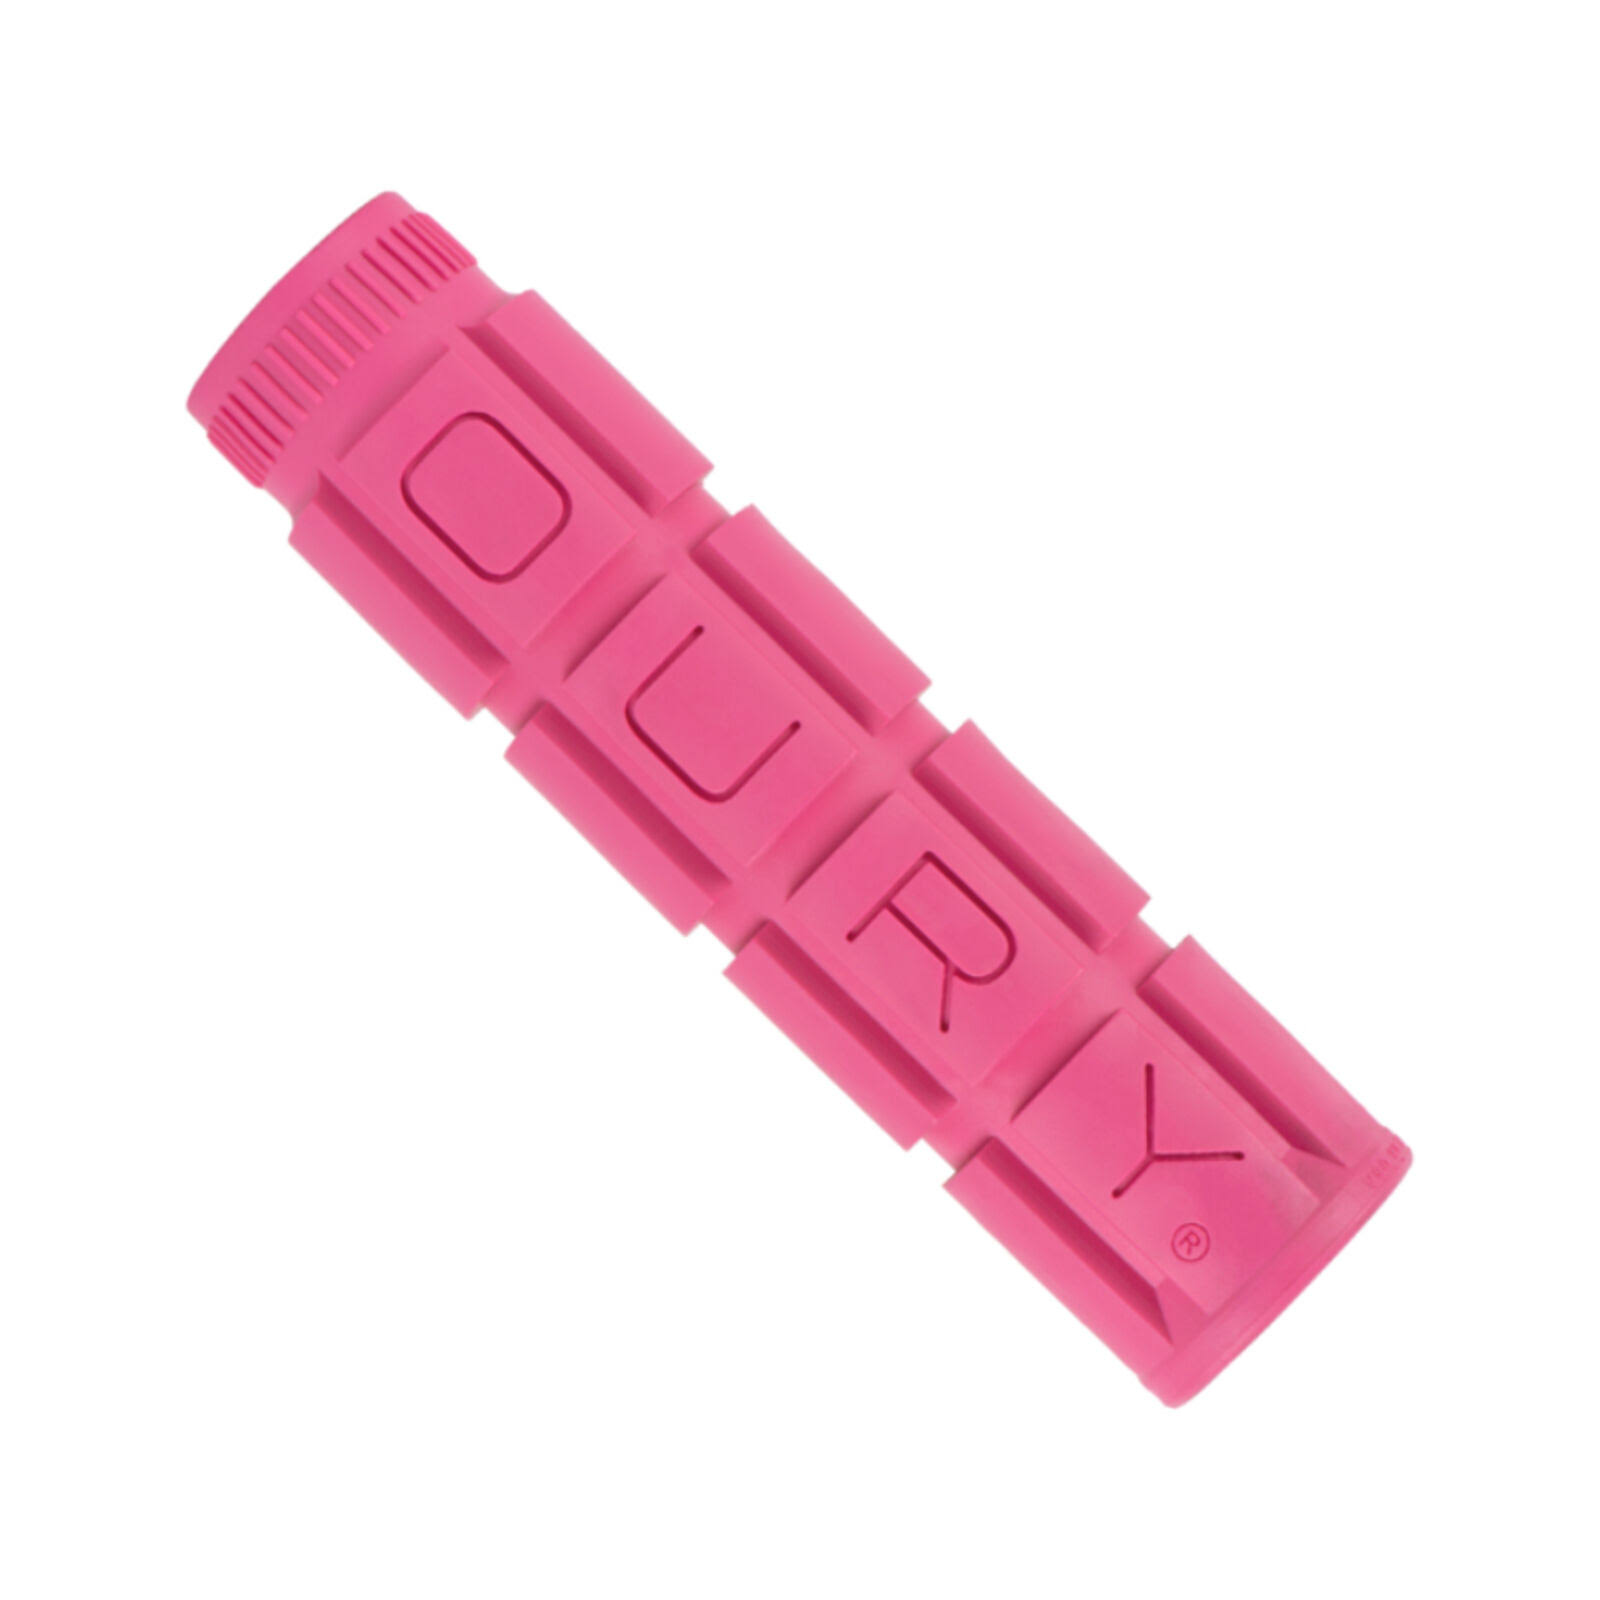 Lizard Skins Single Compound Oury V2 Grips - Pink Rush